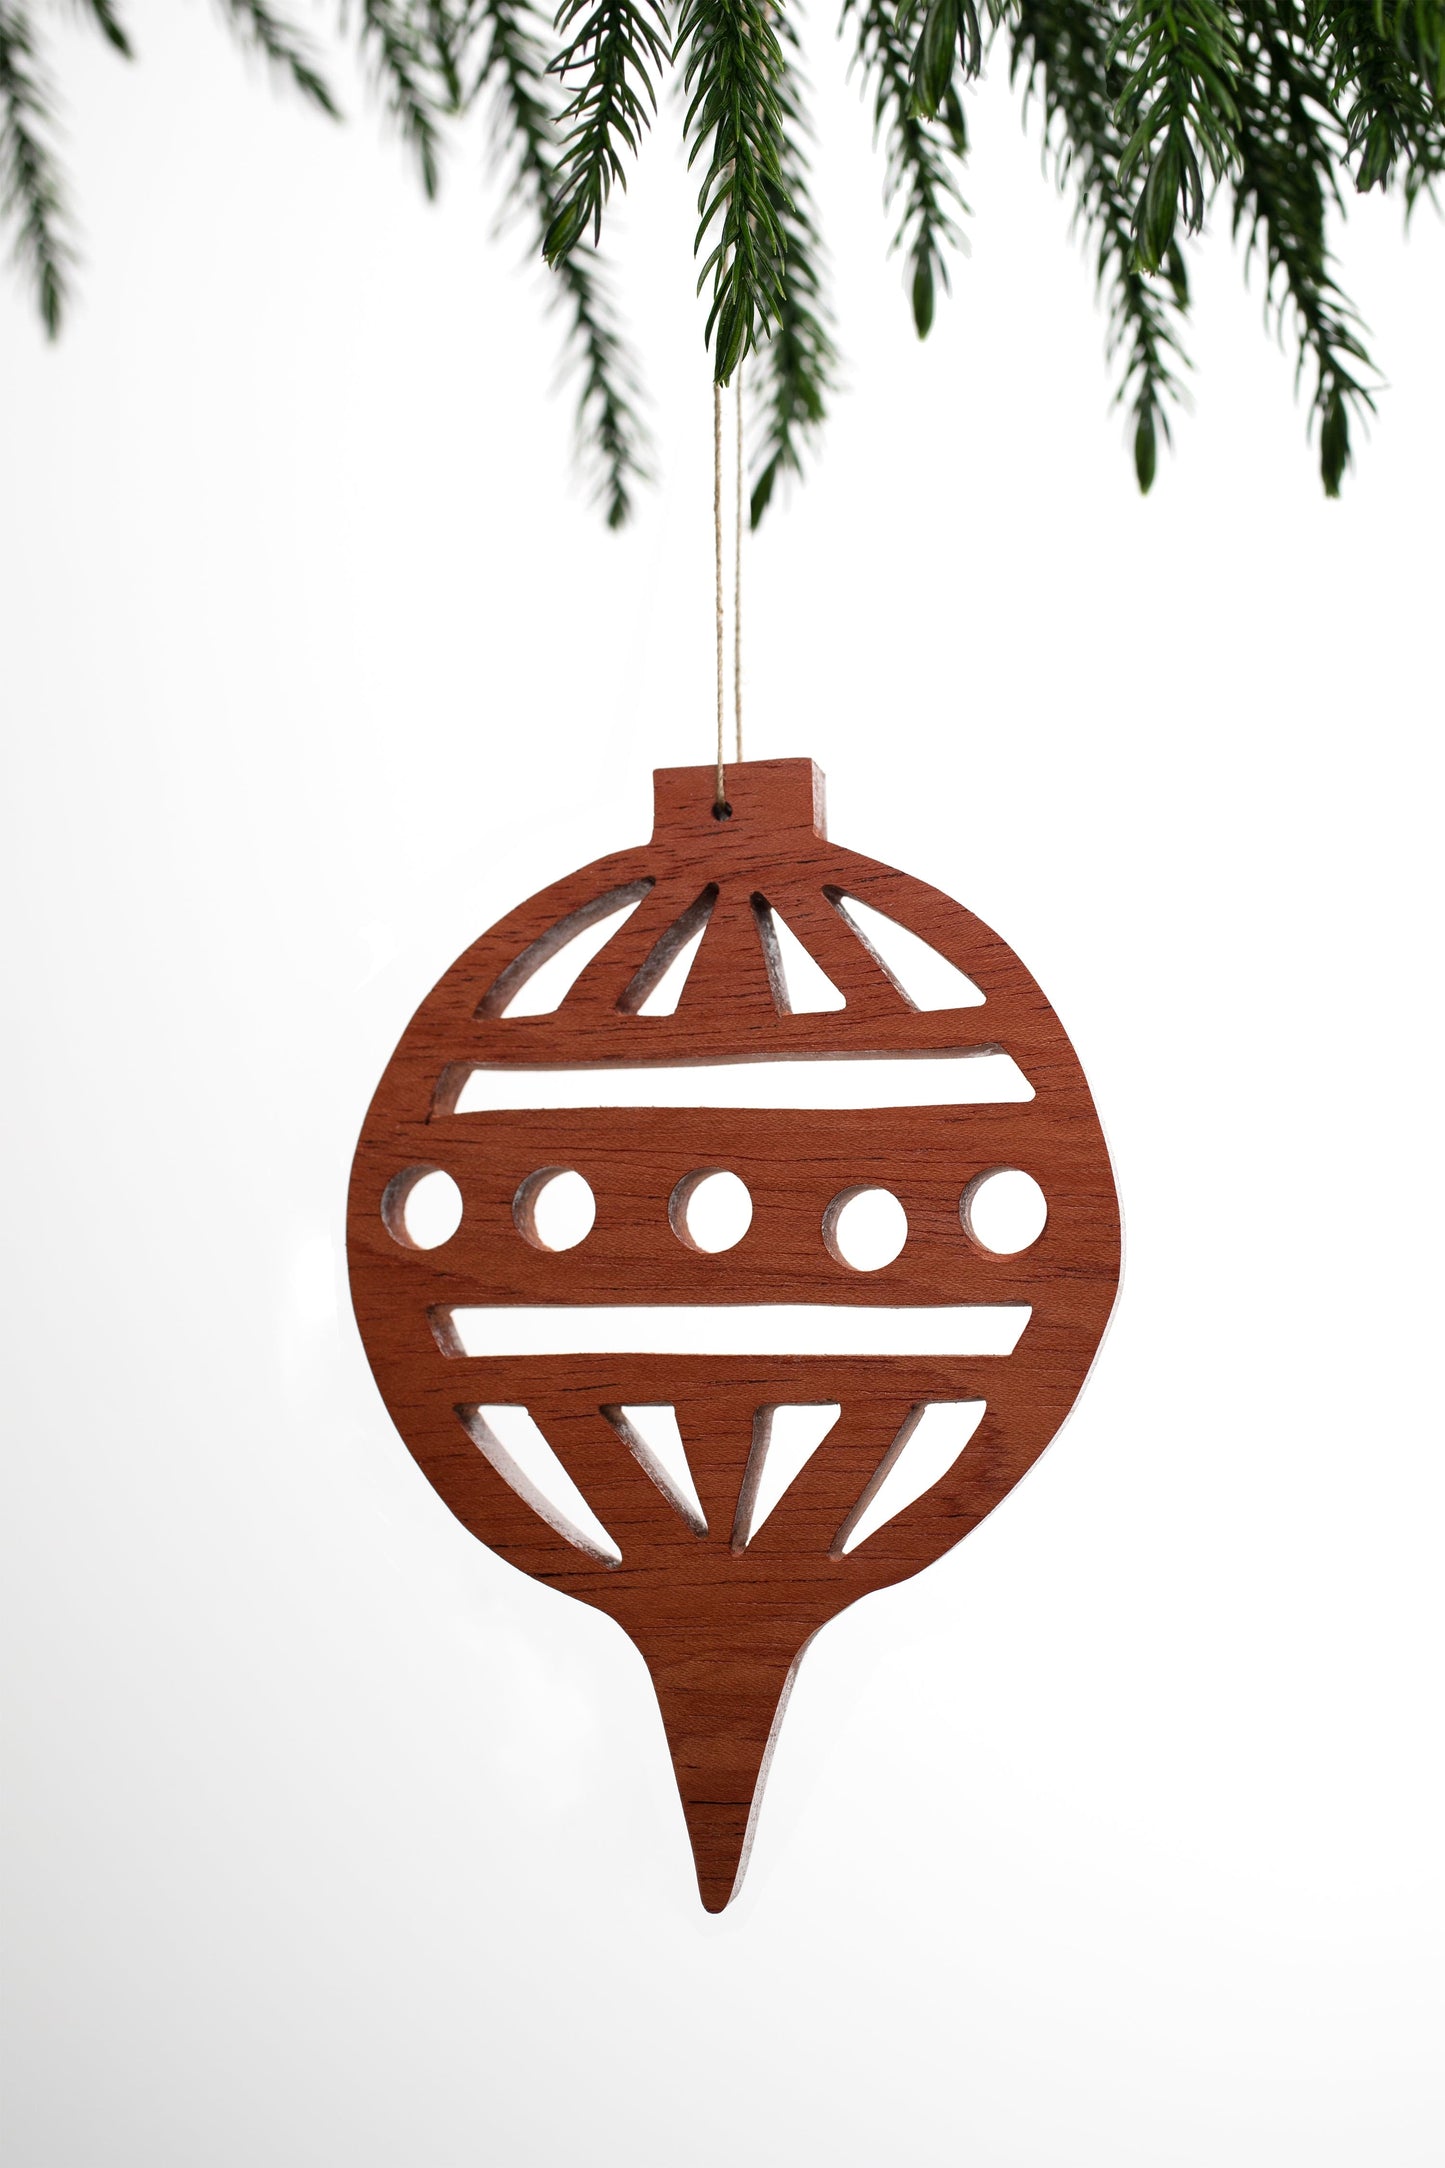 The Carpentry Shop Co. Walnut Ornament Solid Wood Handmade Holiday Ornaments